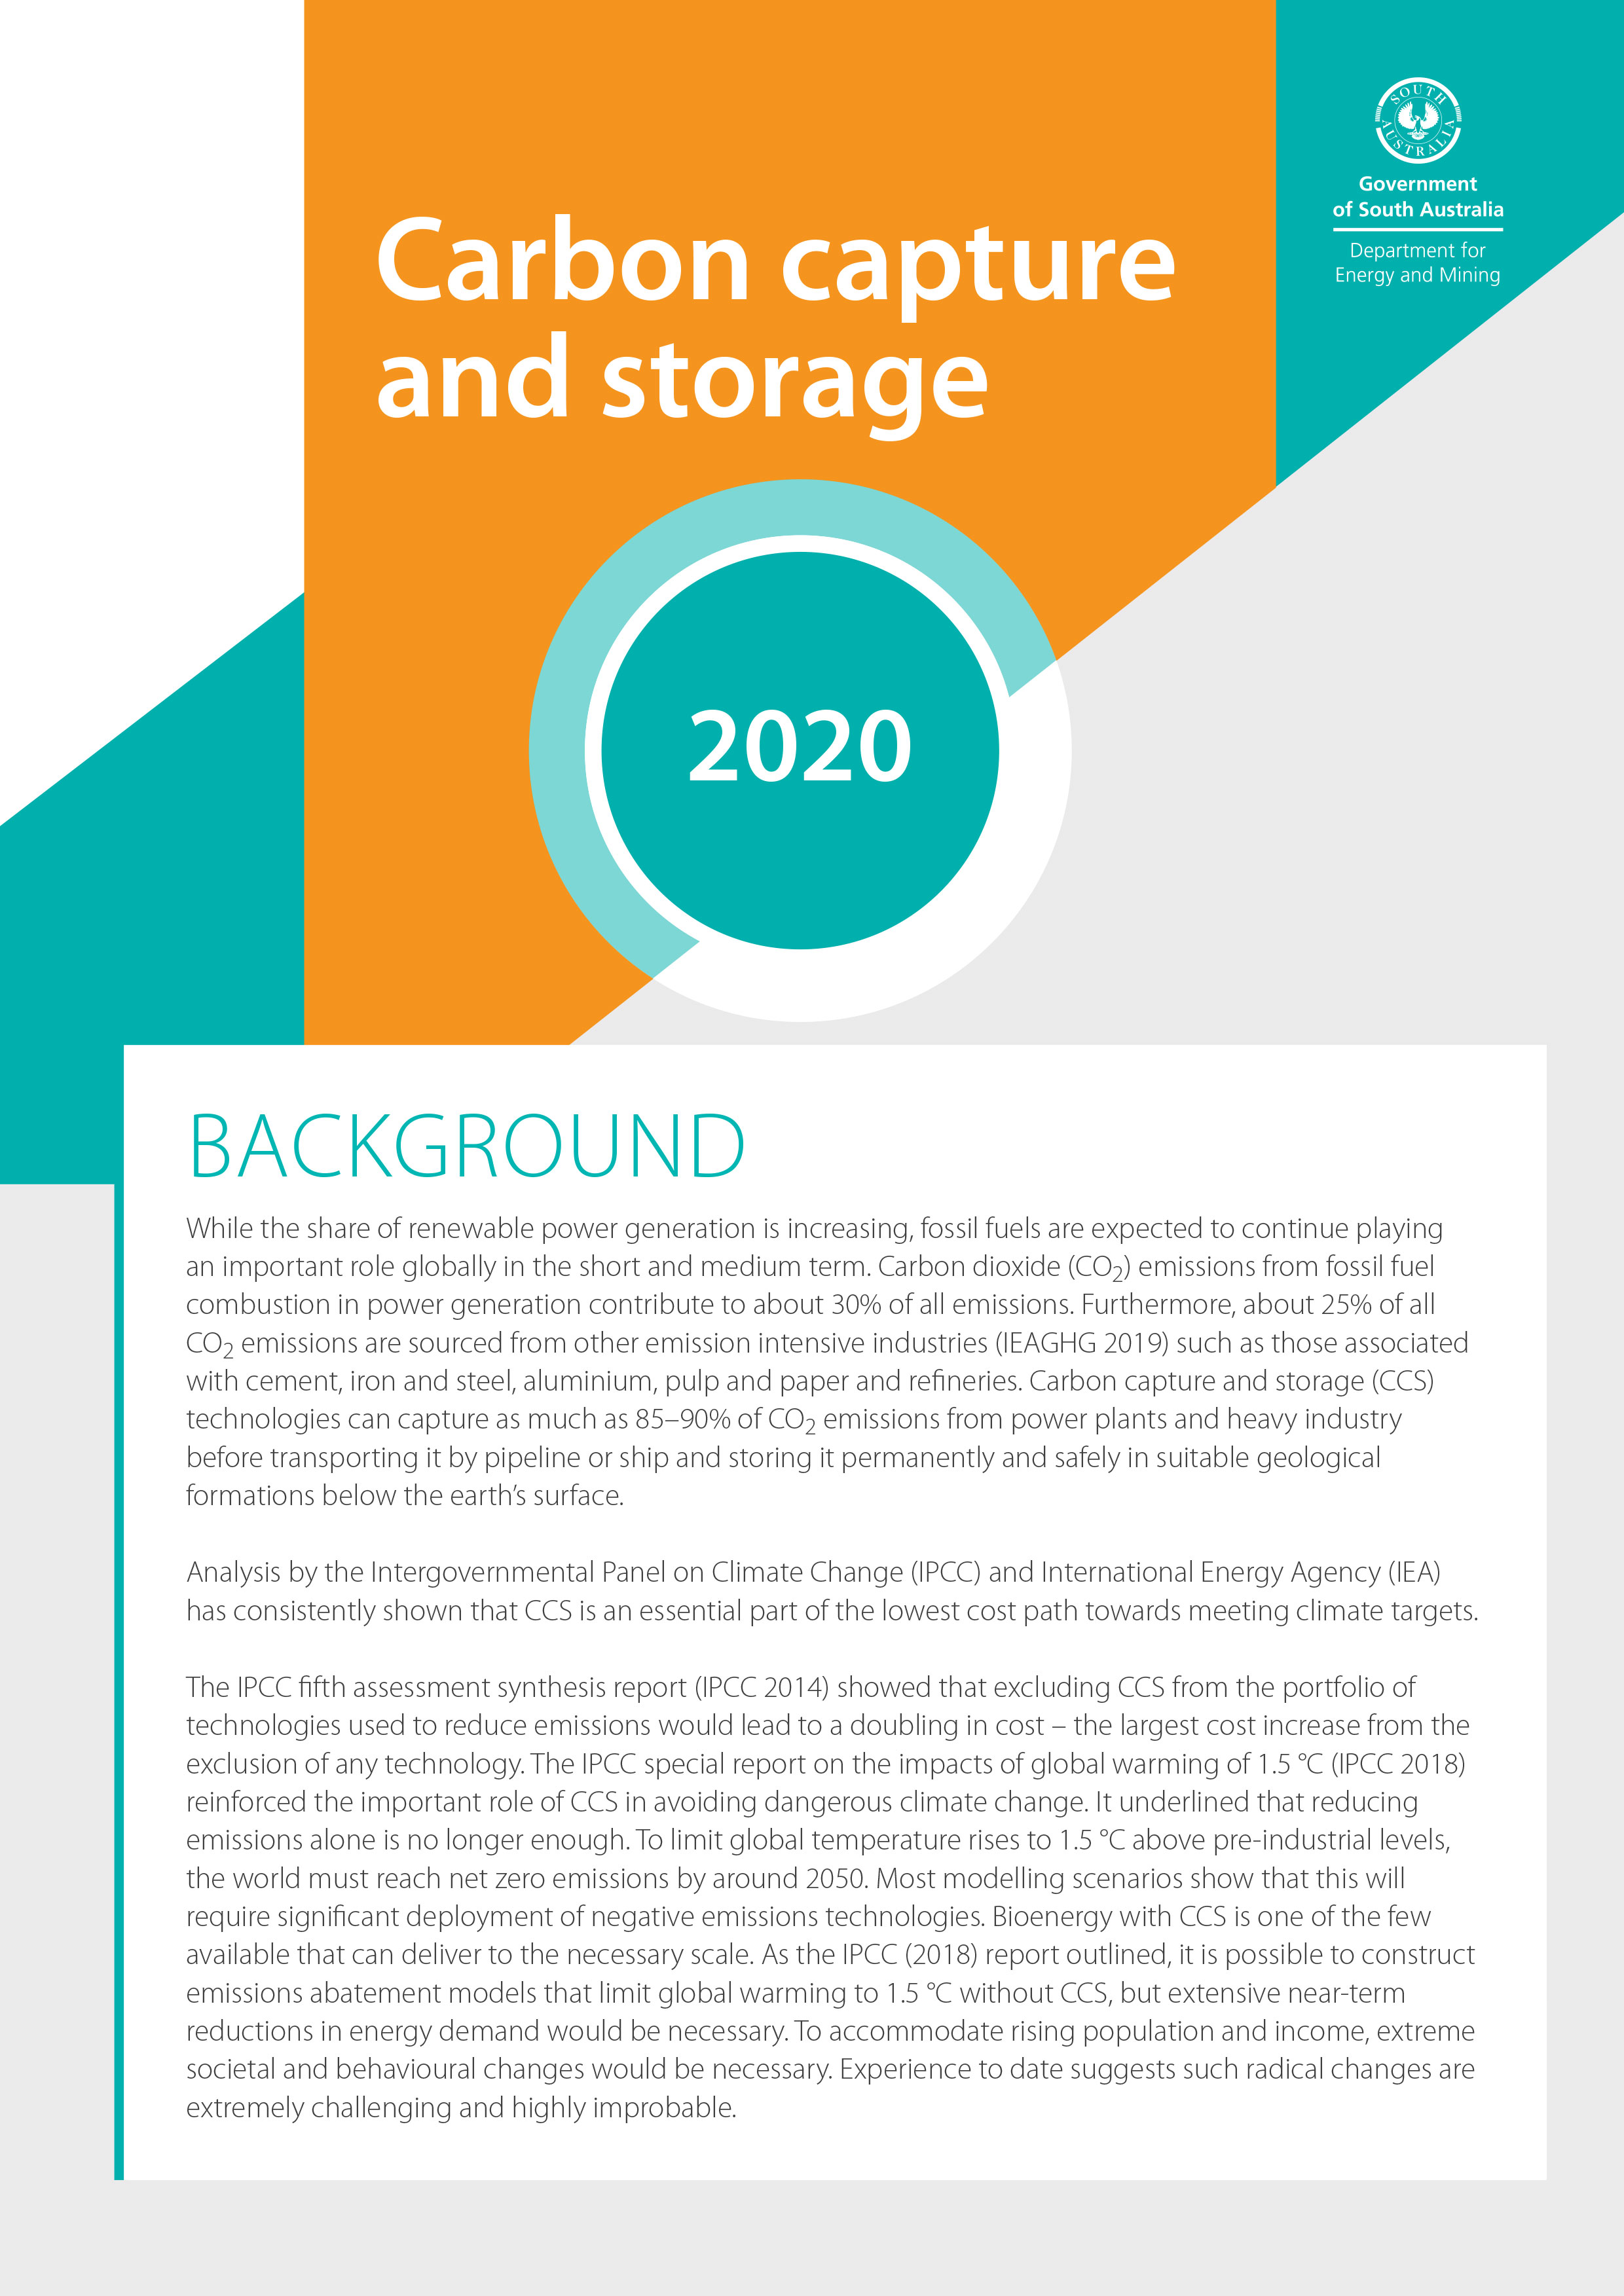 Front cover of Carbon capture and storage brochure